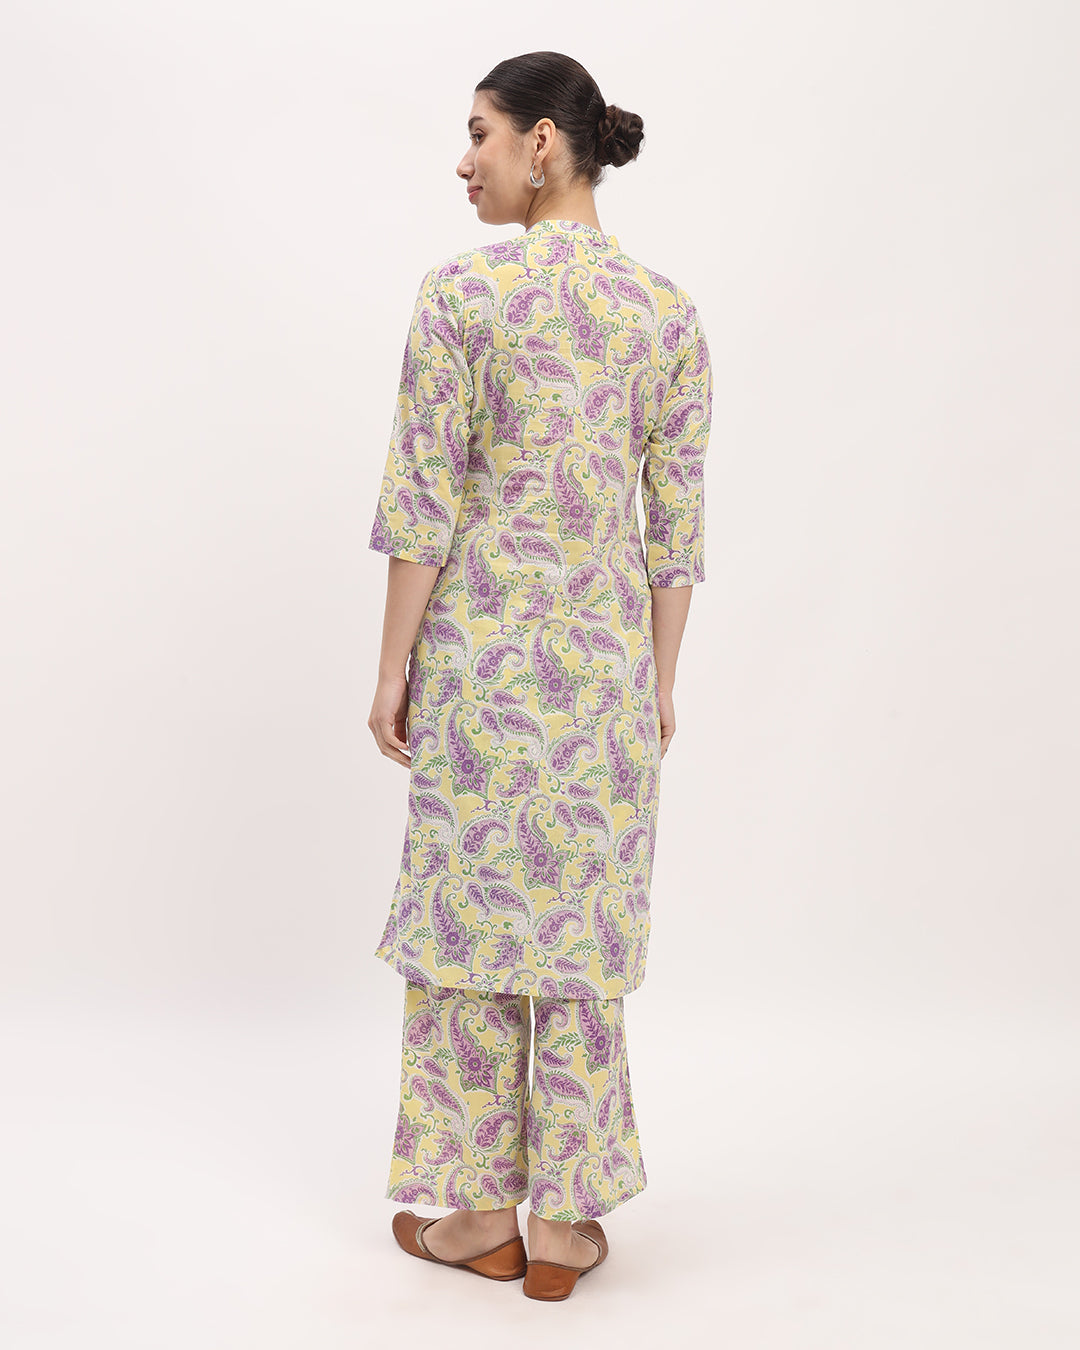 Combo: Lavender Paisley & Pink Chic Lines High-Low Printed Kurta (Without Bottoms)